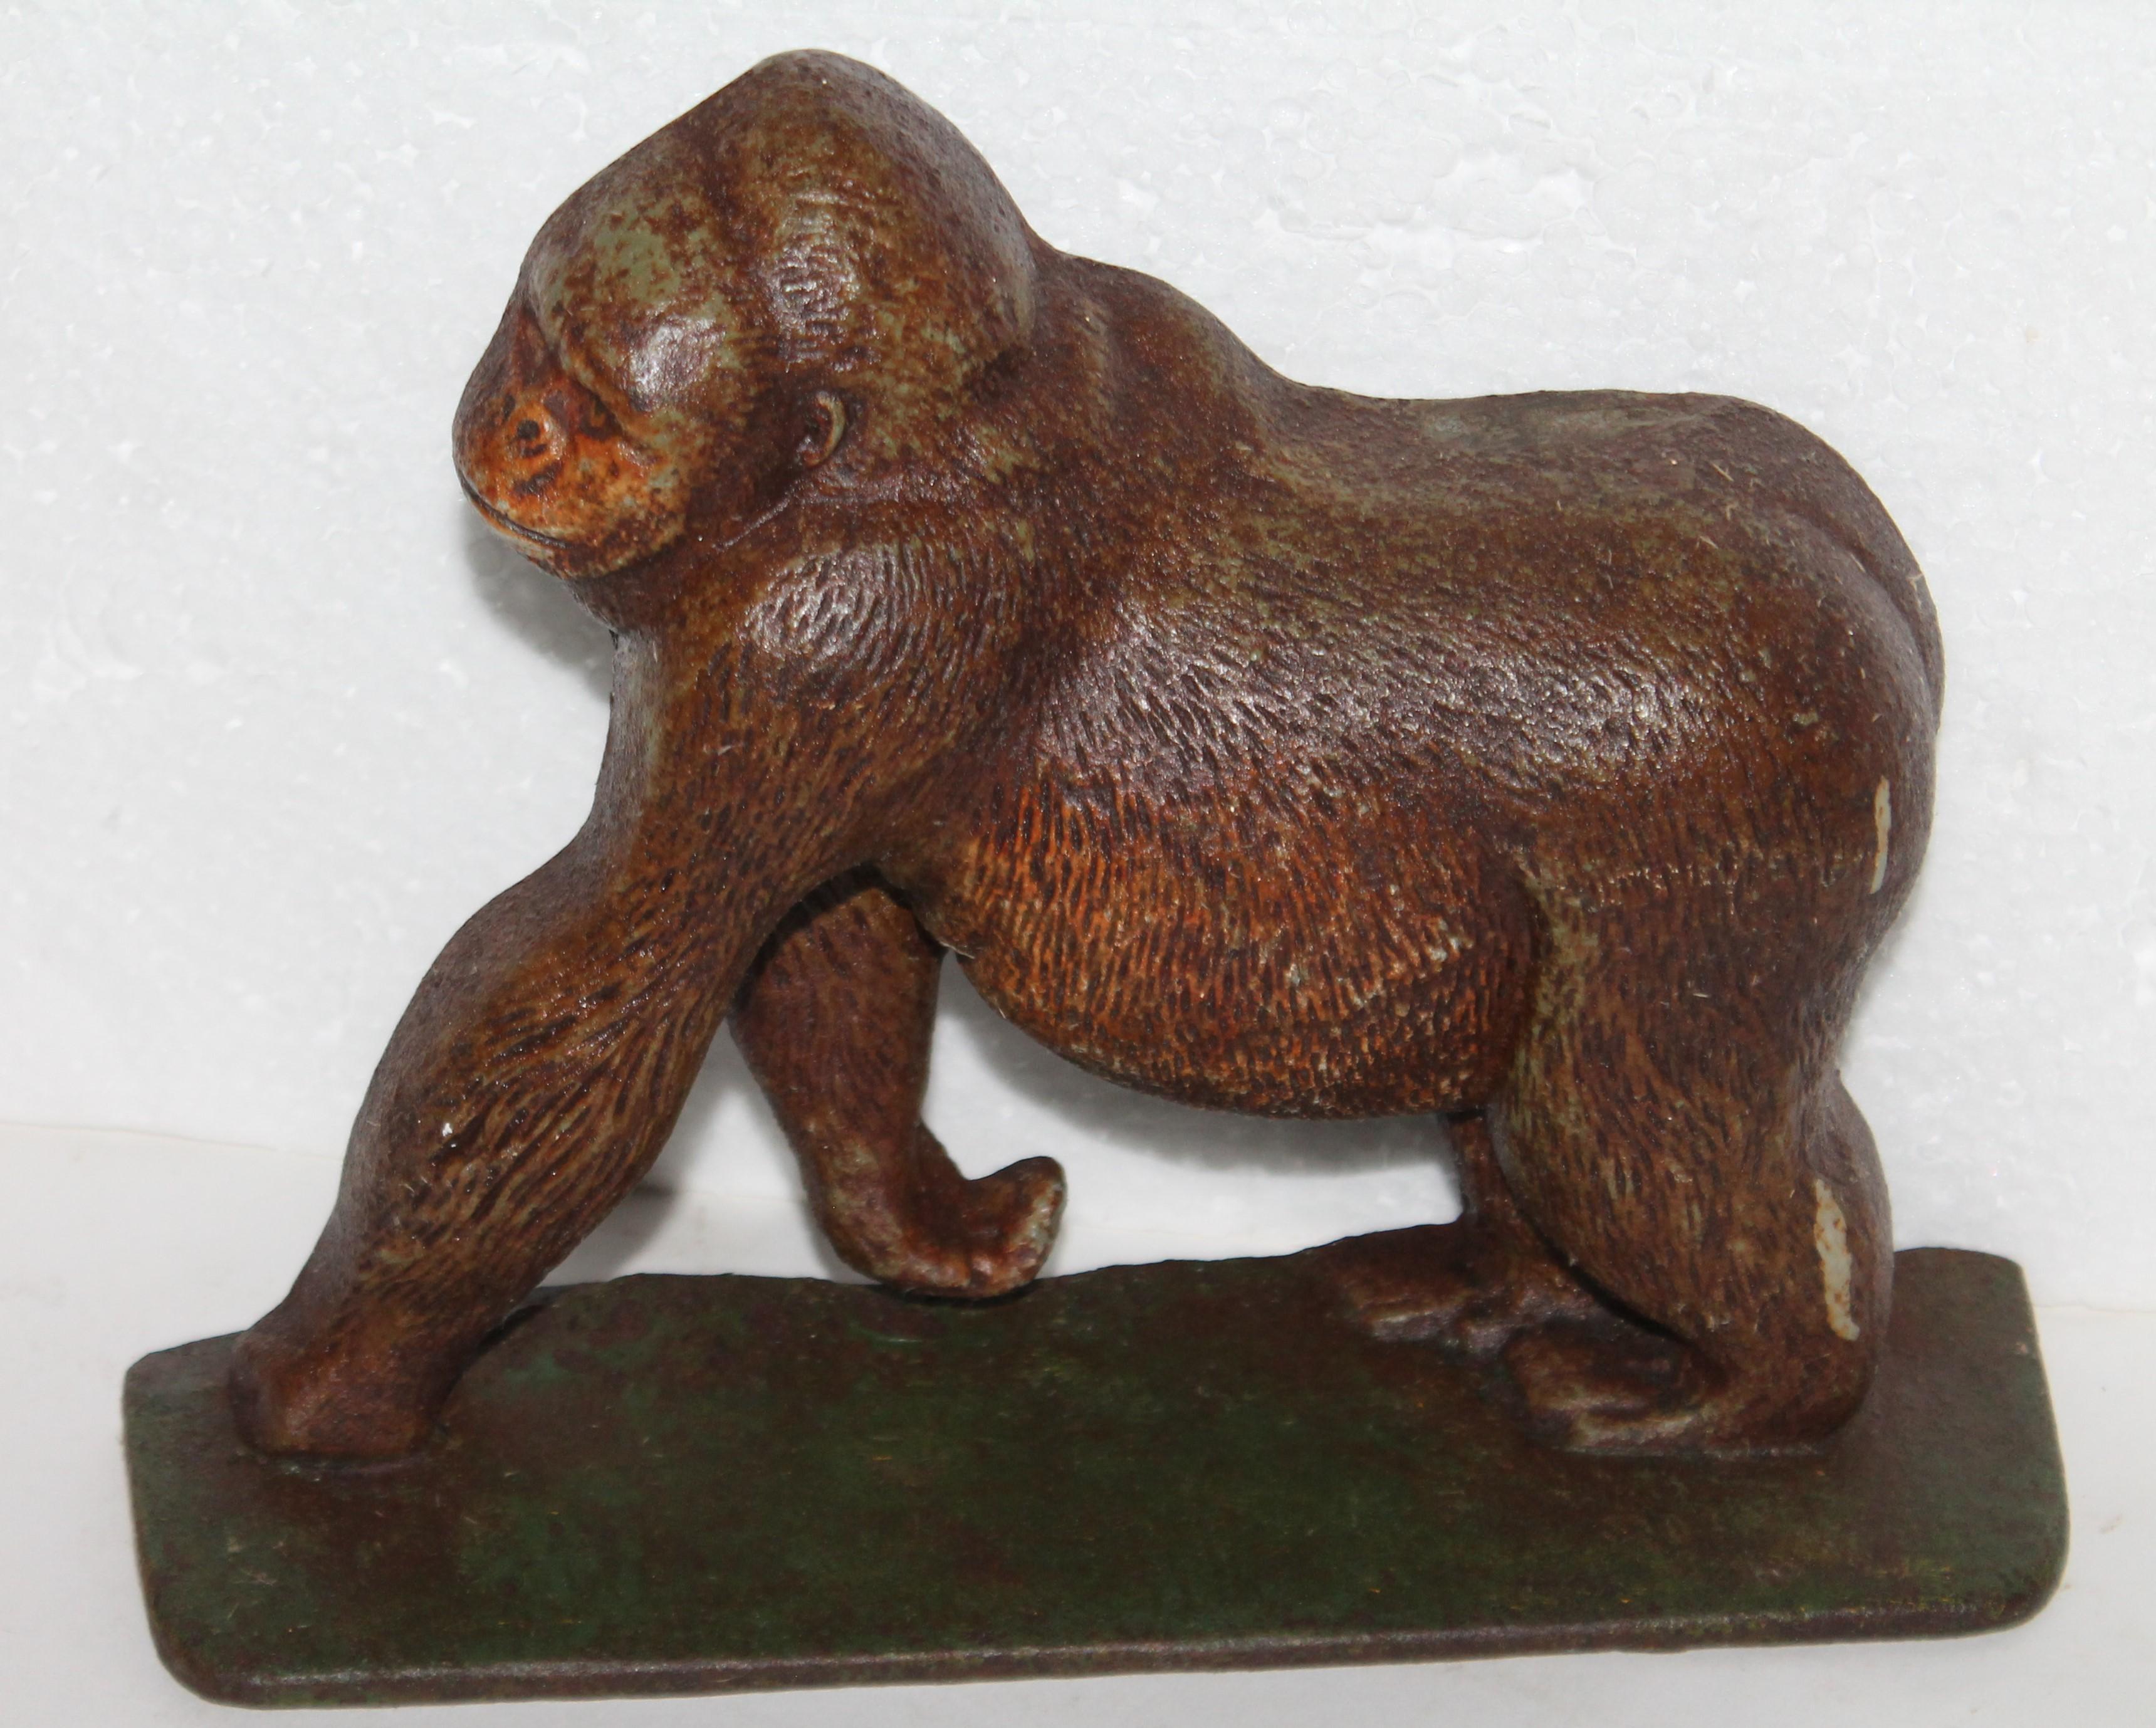 19th century original painted Hubley gorilla door stop in fine condition. This is very rare and unusual.